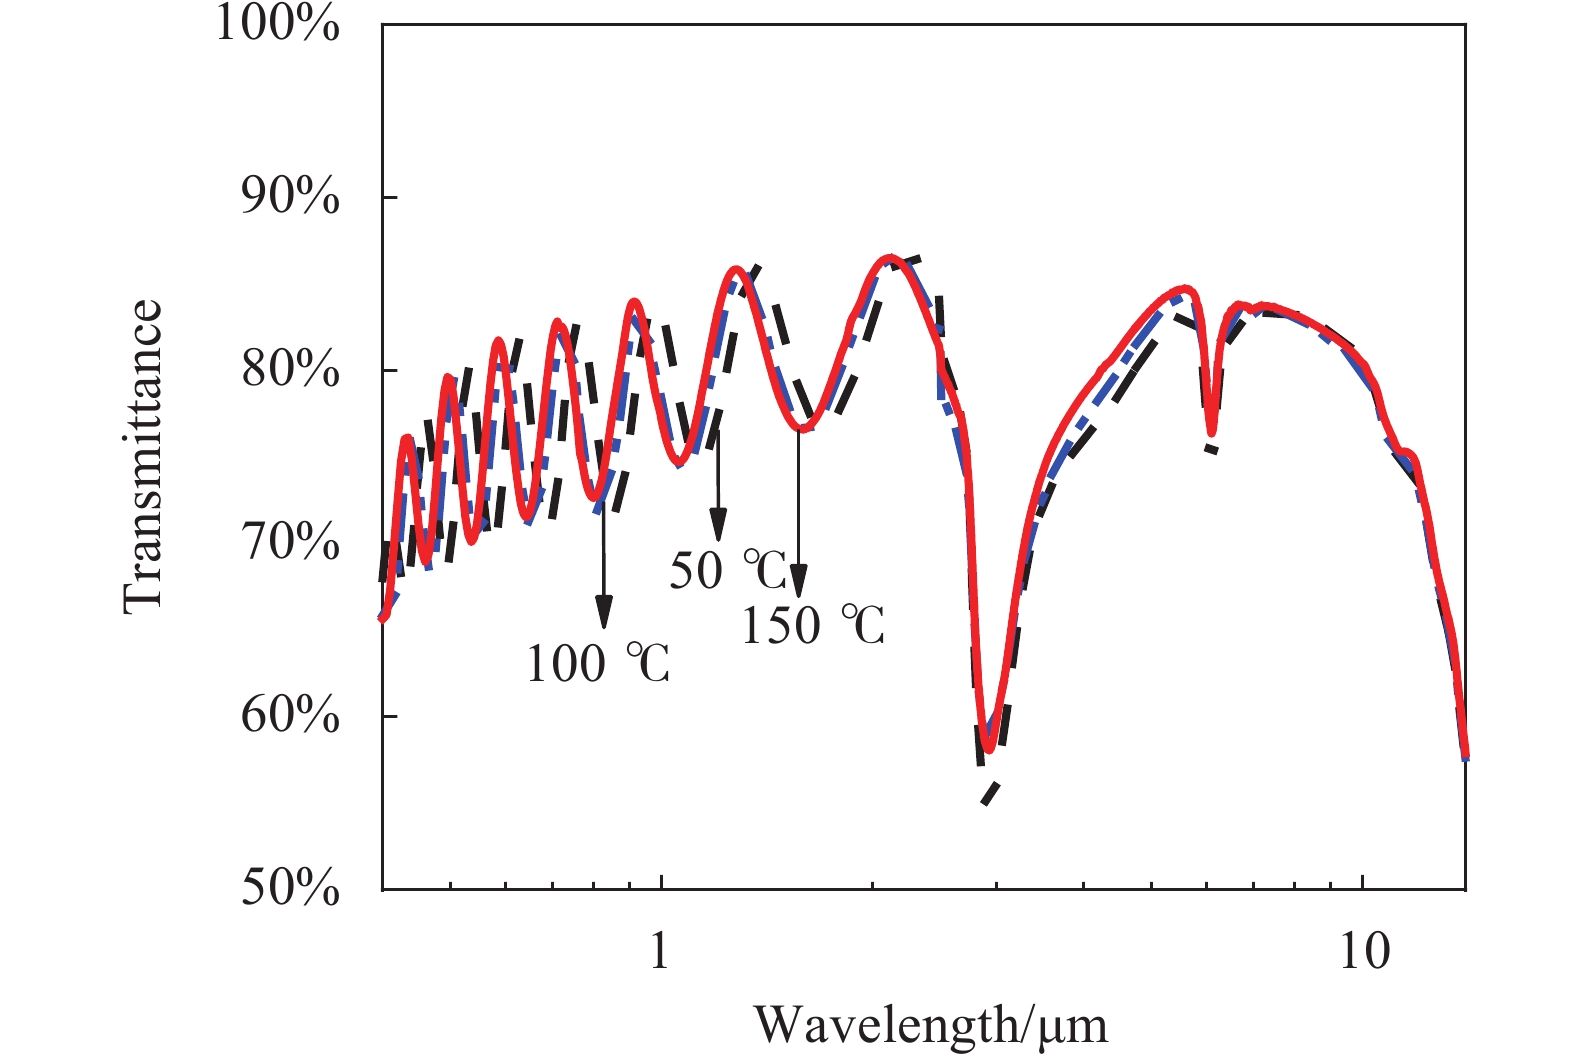 Transmittance spectra curves of YbF3 thin films deposited at different substrate temperatures